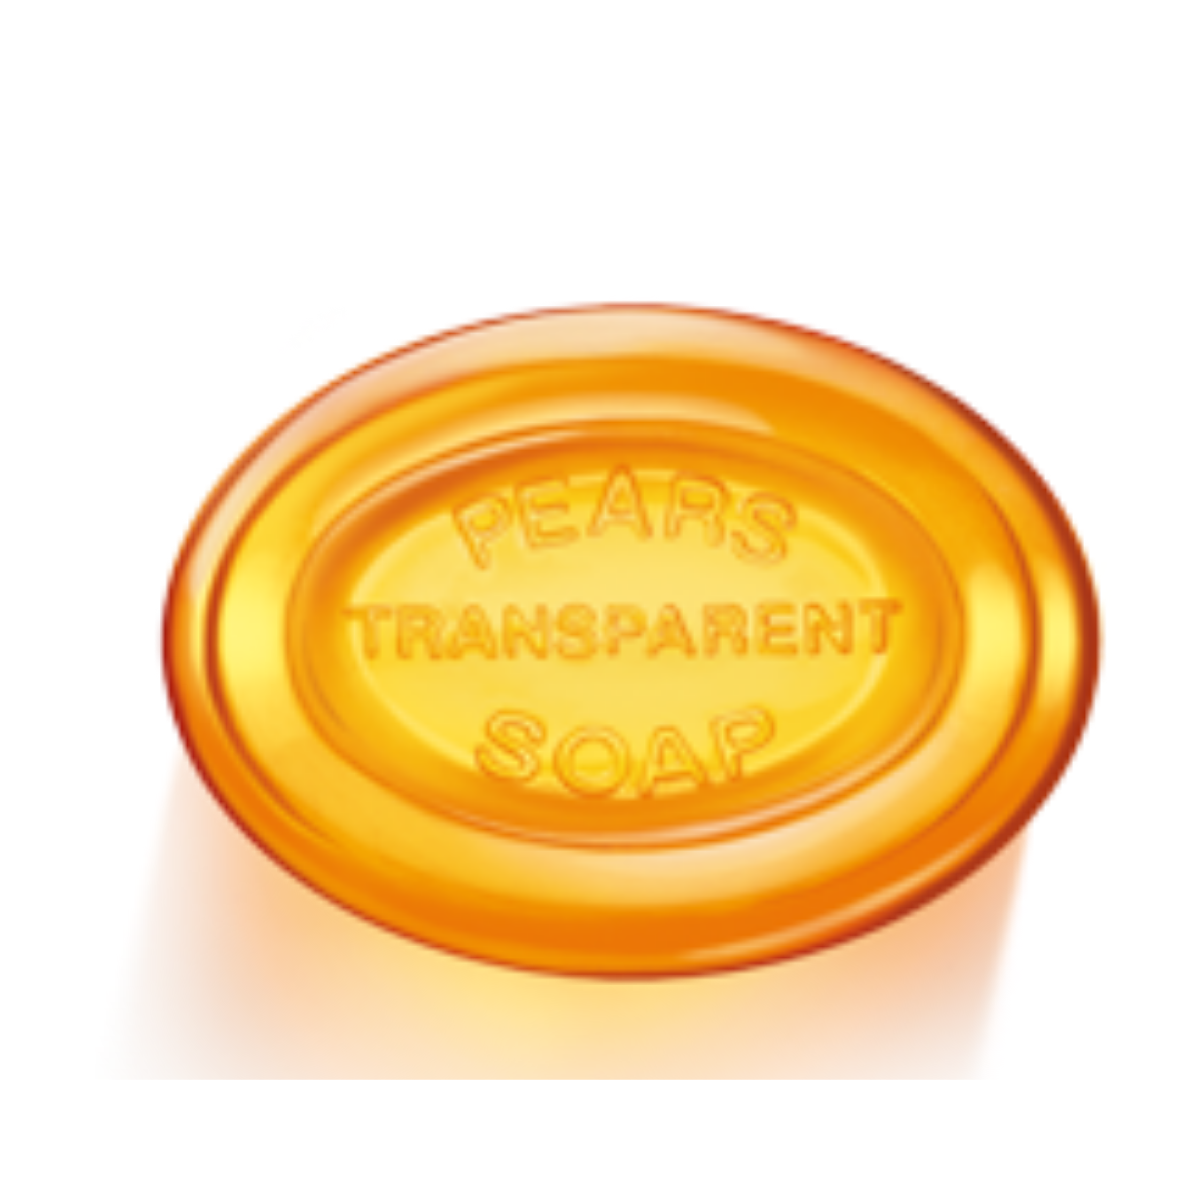 Primary Image of Pears Transparent Soap